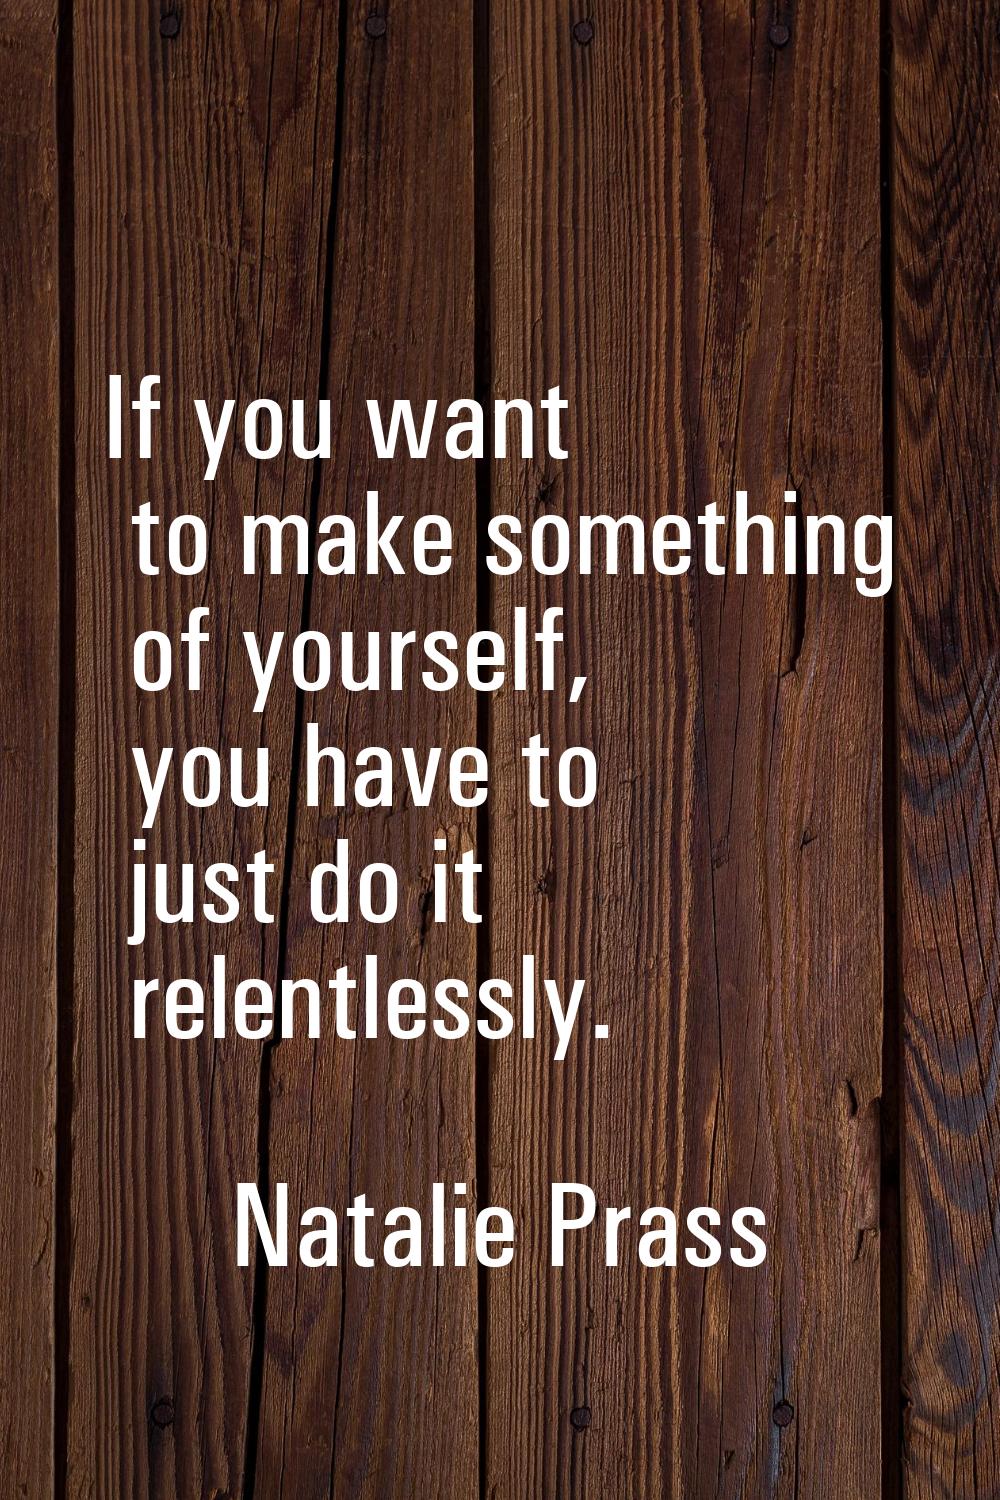 If you want to make something of yourself, you have to just do it relentlessly.